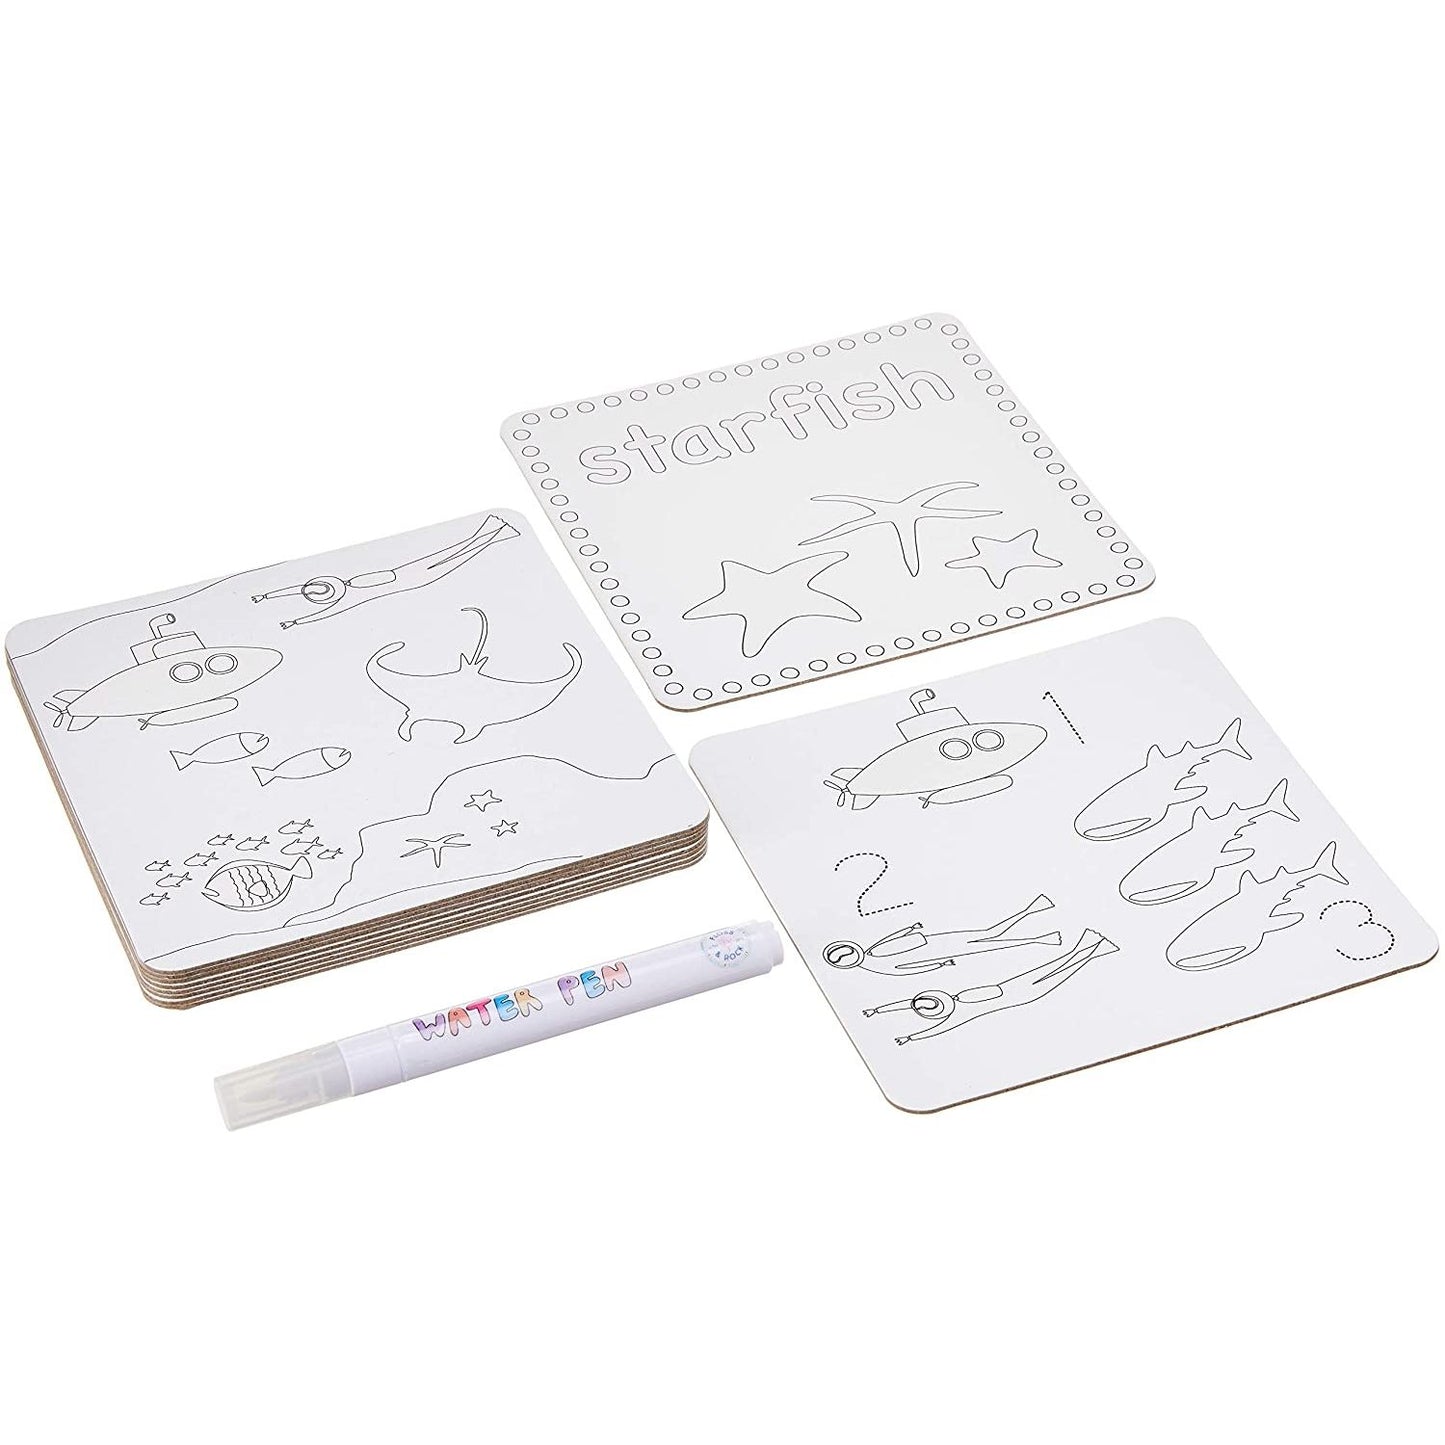 Magic Water Pad and Pen Cards